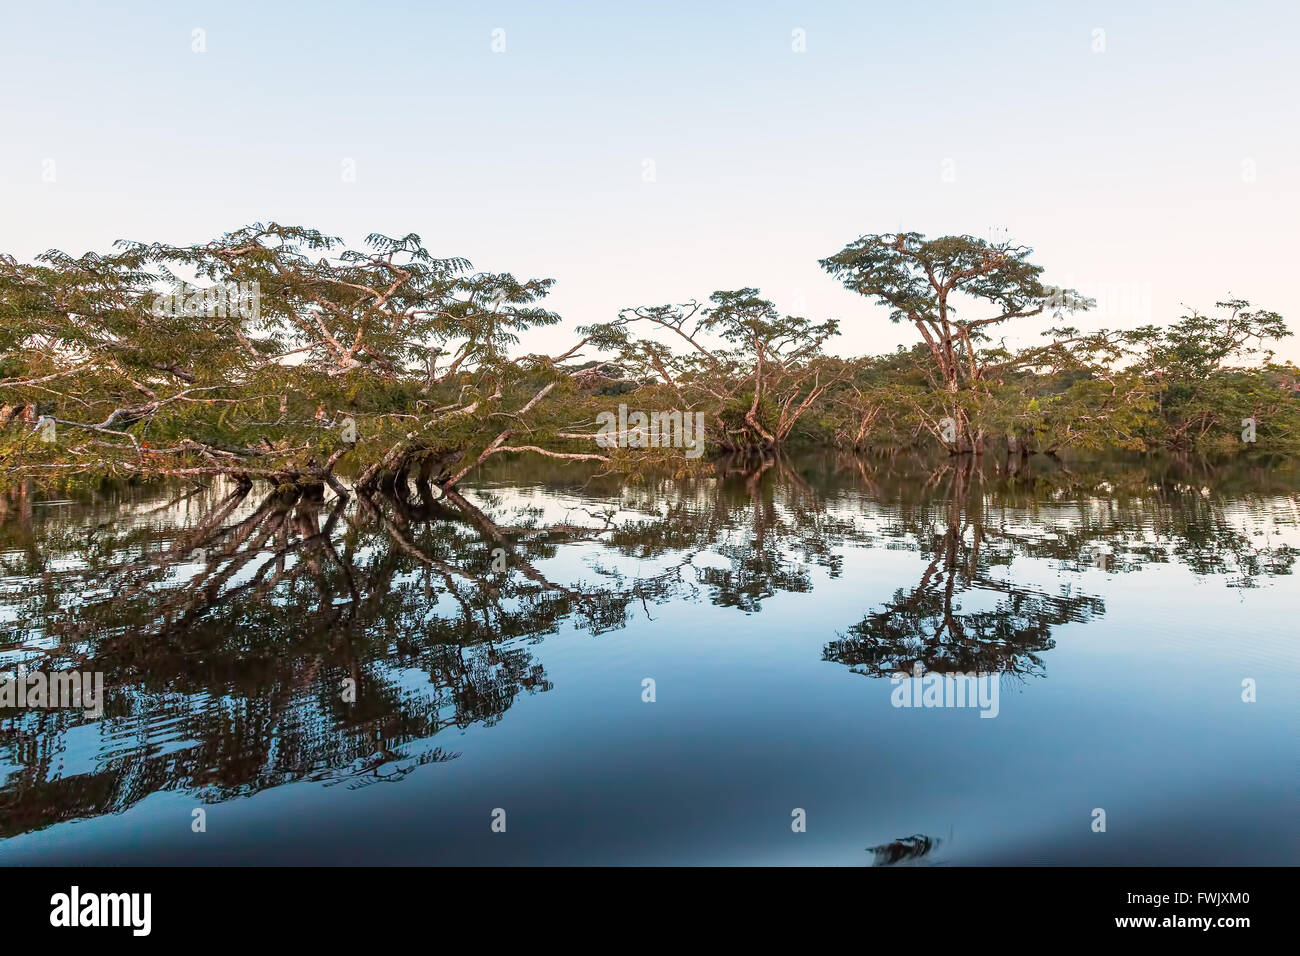 Water Trees In Cuyabeno Wildlife Reserve, South America Stock Photo